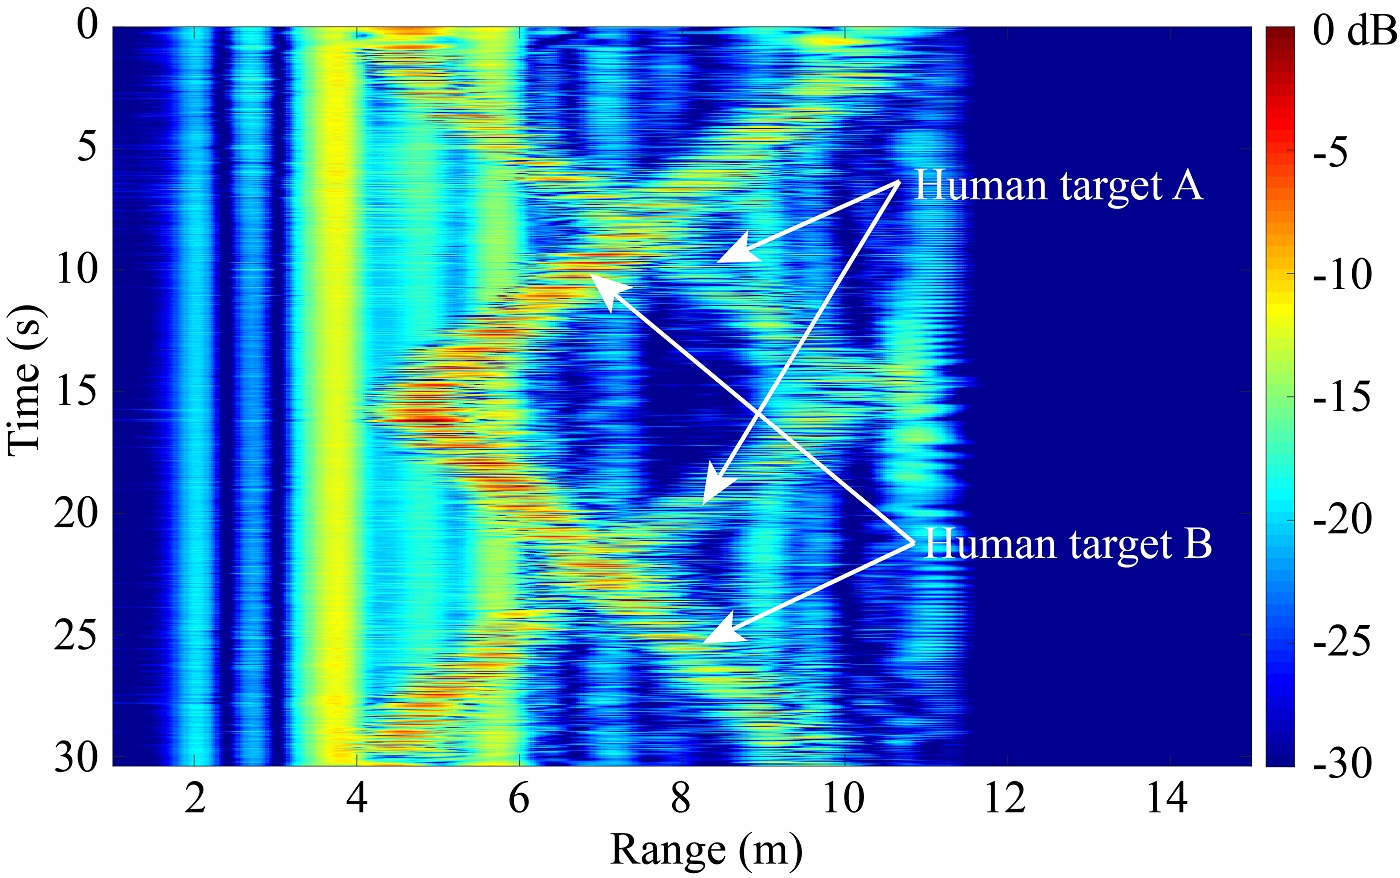 Fig. 5. Range profile of two human targets walking in opposite directions